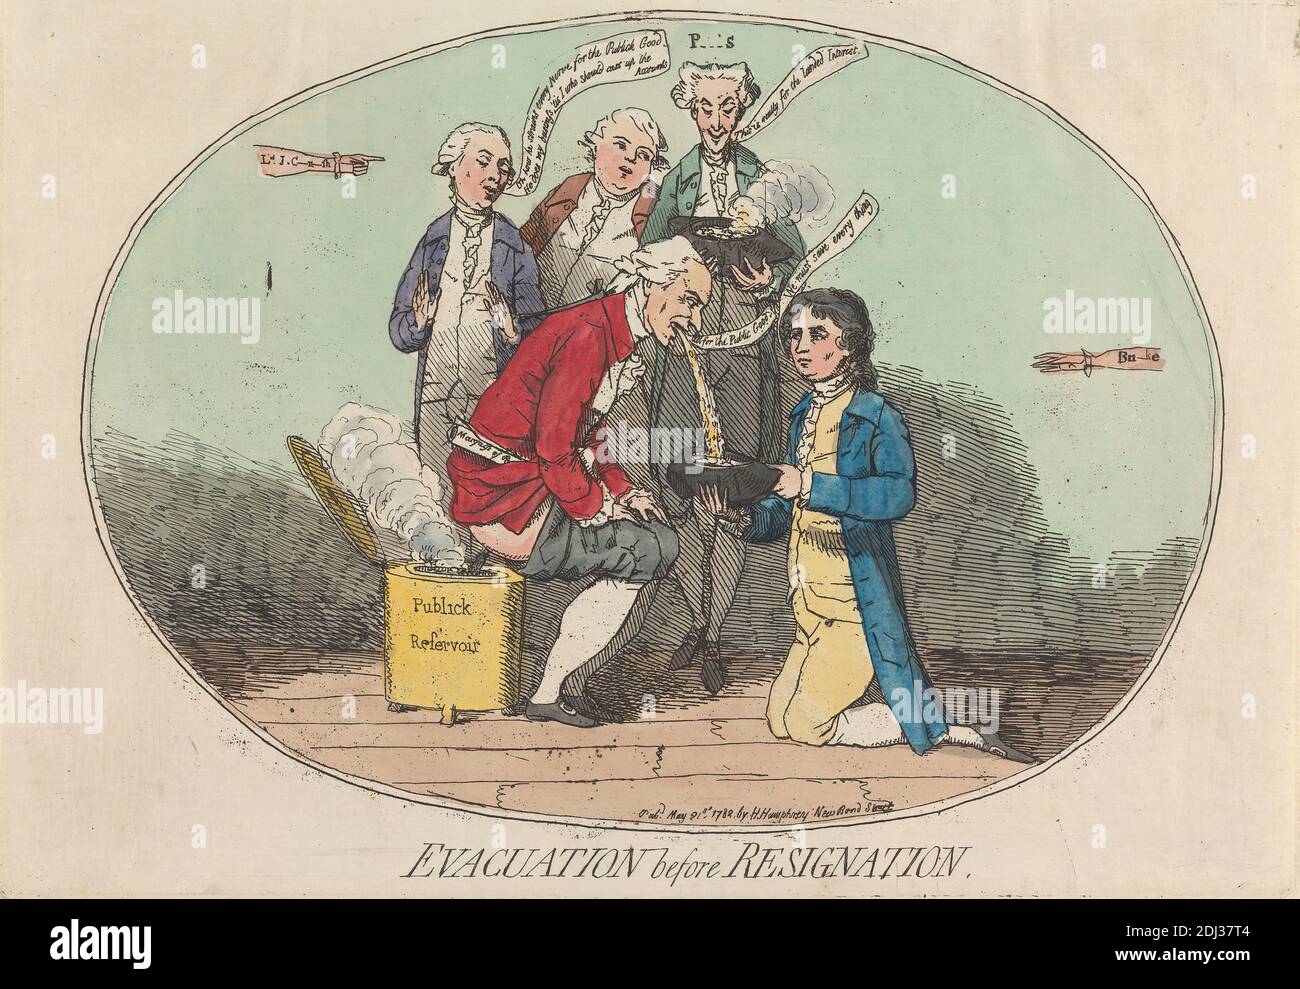 Evacuation Before Resignation, (?) James Gillray, 1757–1815, British, 1782, Etching, hand-colored, Sheet: 6 3/4 x 9 1/2in. (17.1 x 24.1cm Stock Photo